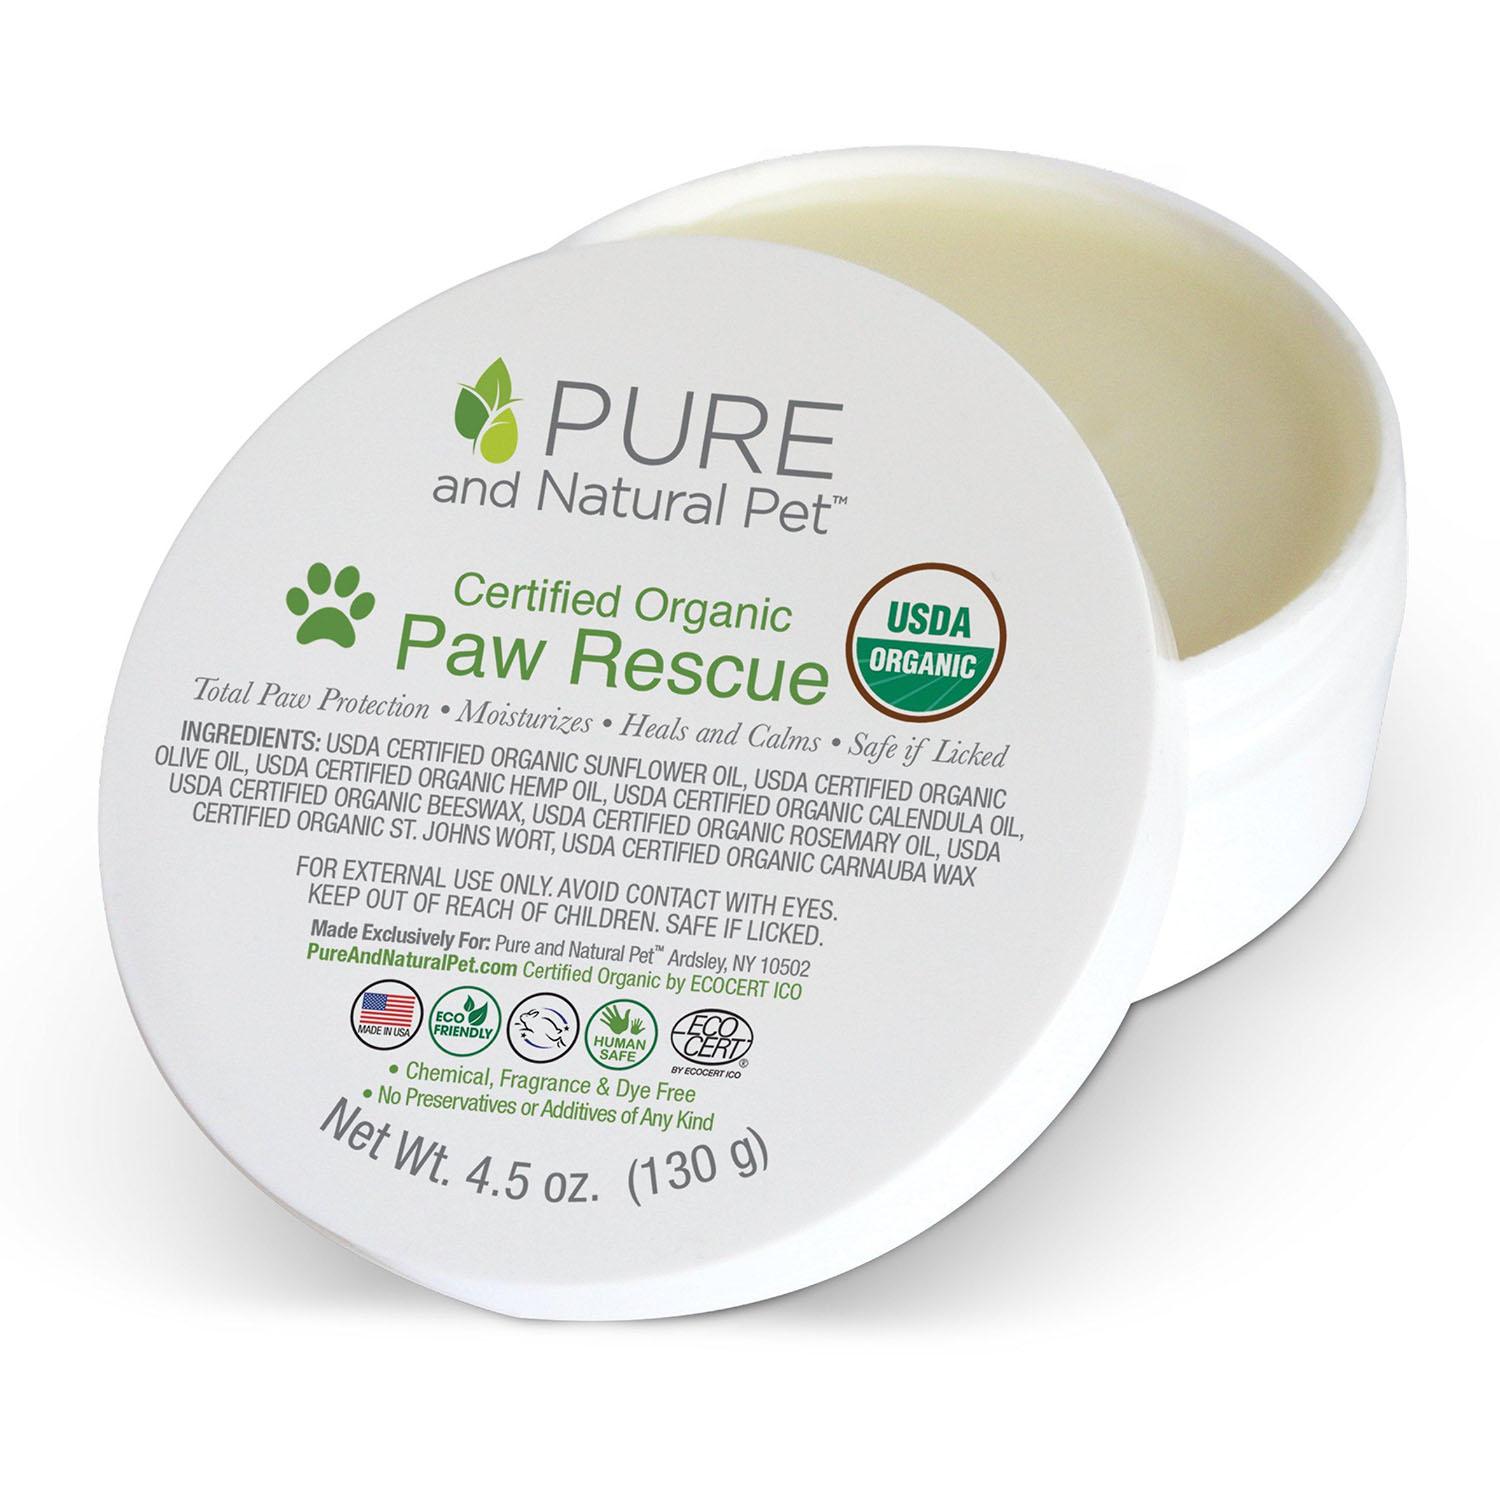 Pure and Natural Pet Certified Organic Paw Rescue for Dogs